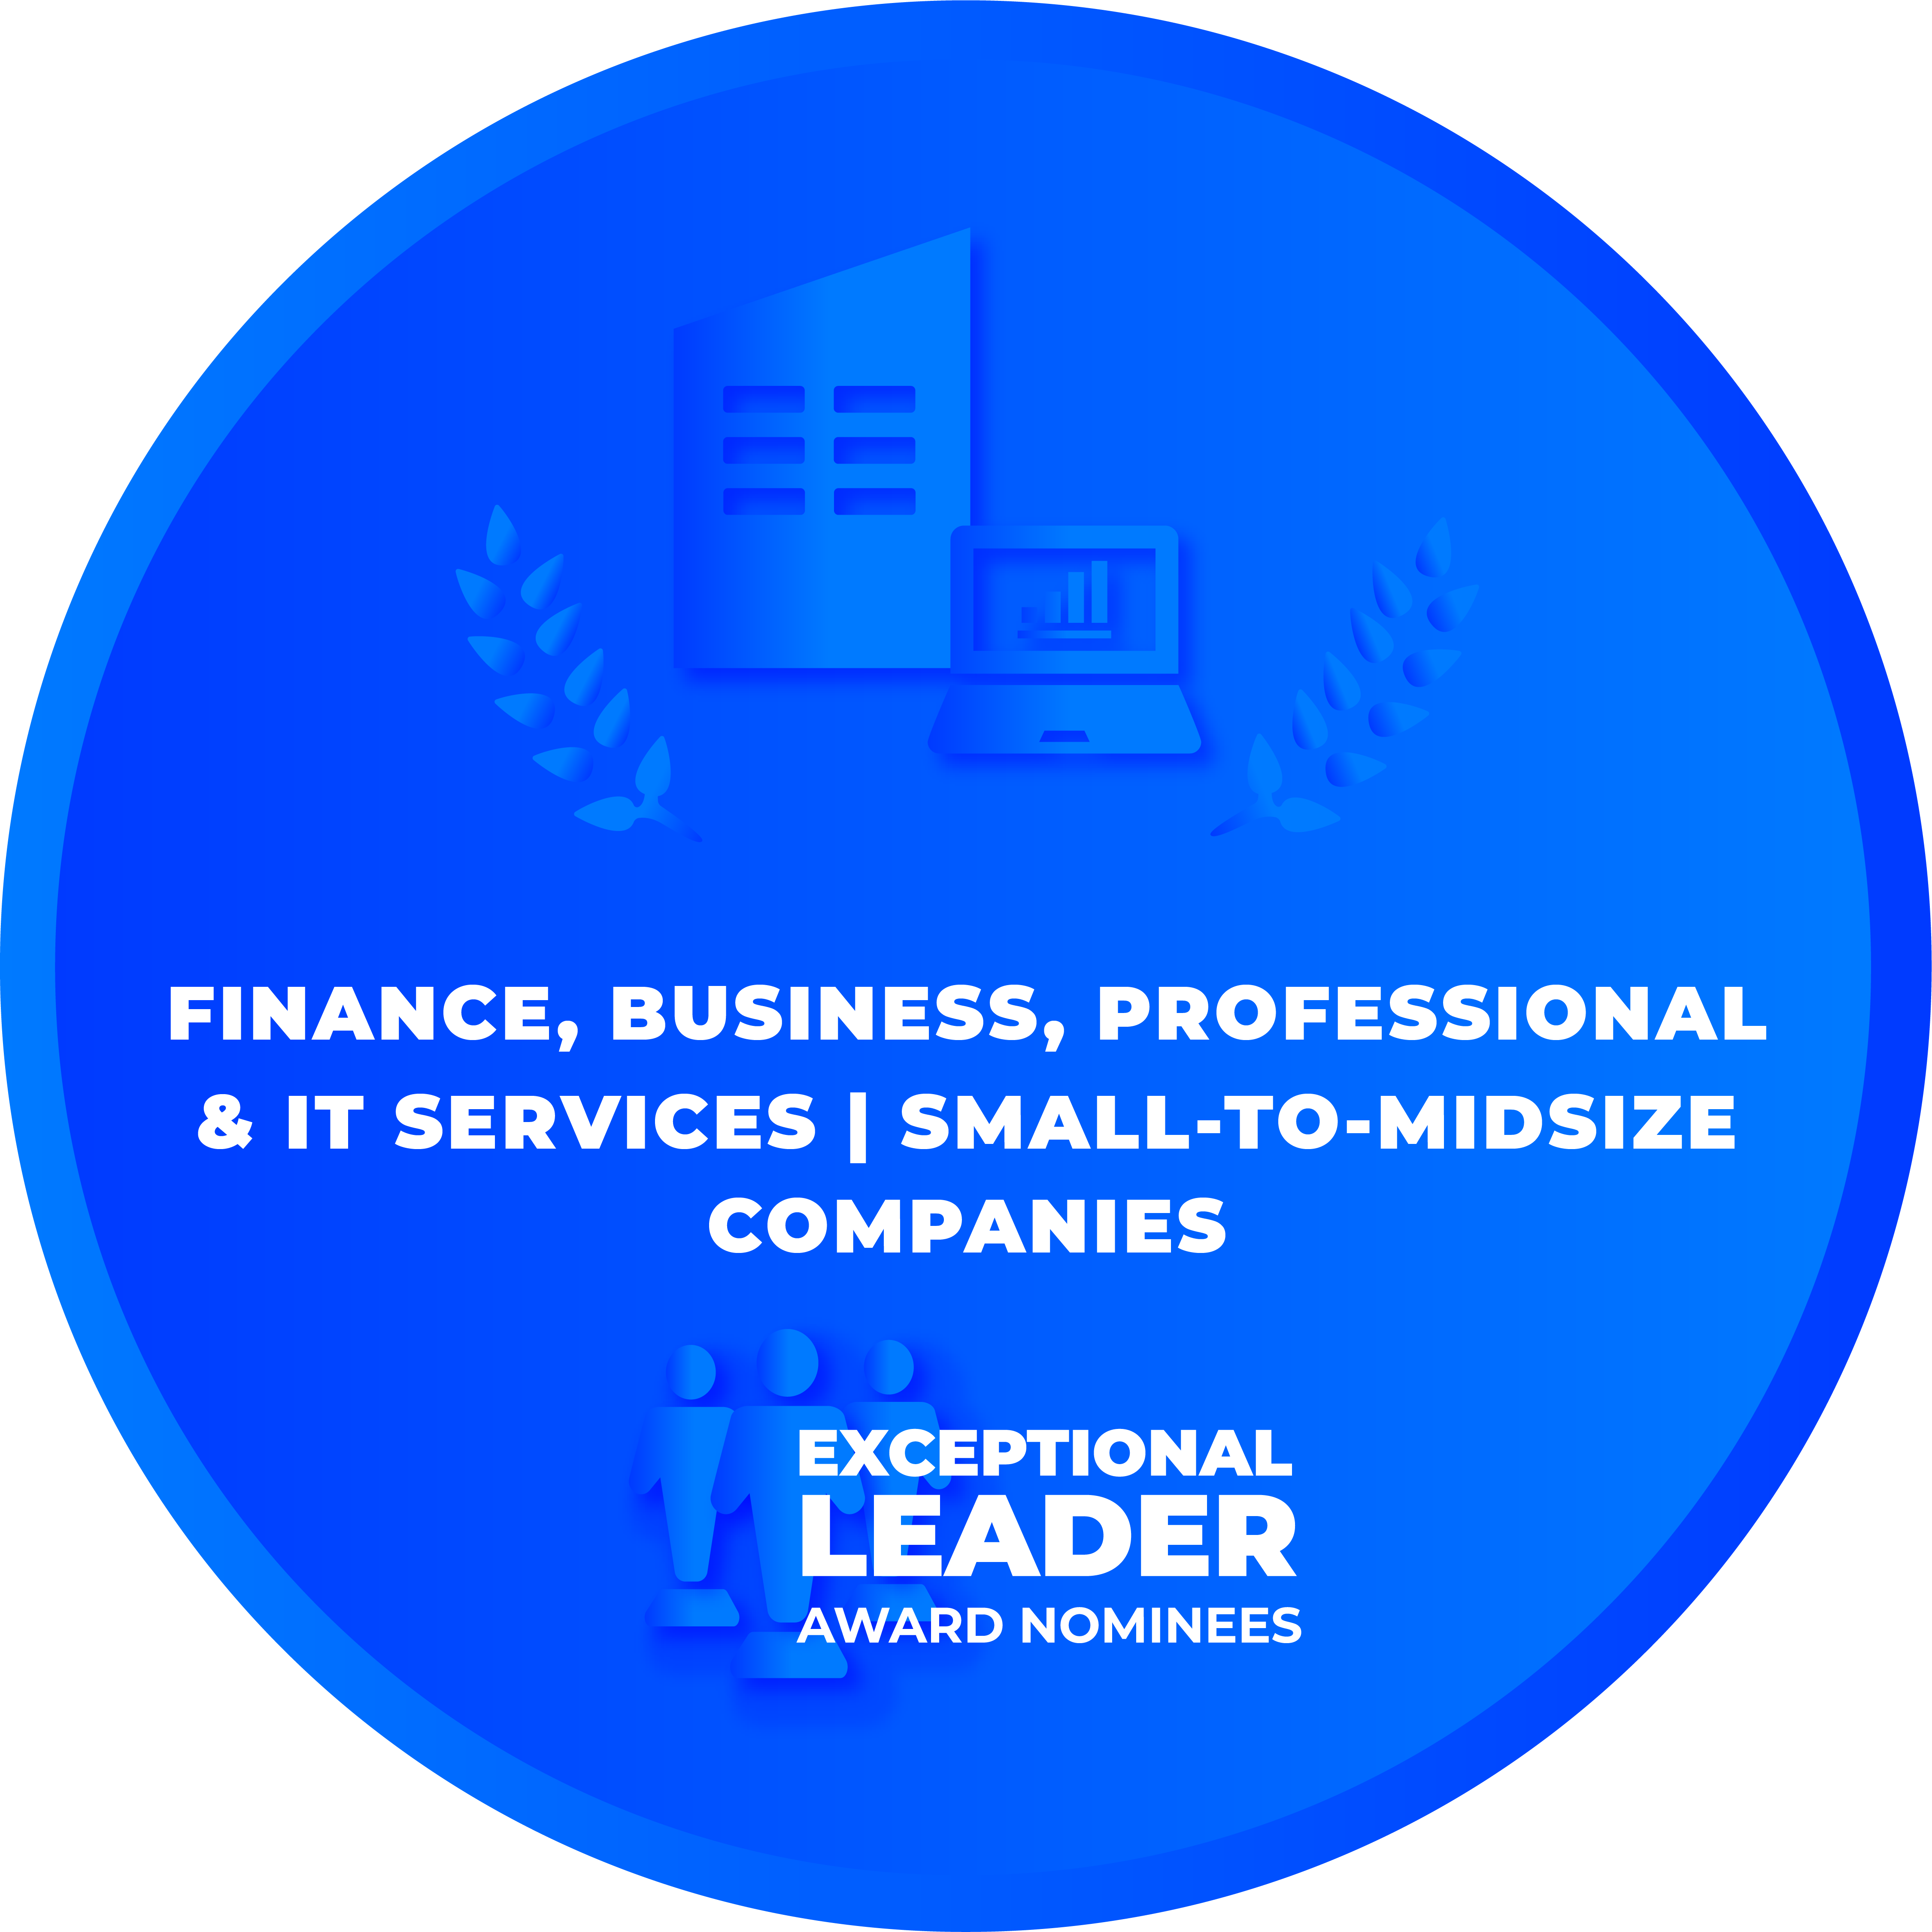 CRCA 2022 - EXCEPTIONAL LEADER AWARDS - Finance Business Professional IT Services Small-to-Midsize Companies